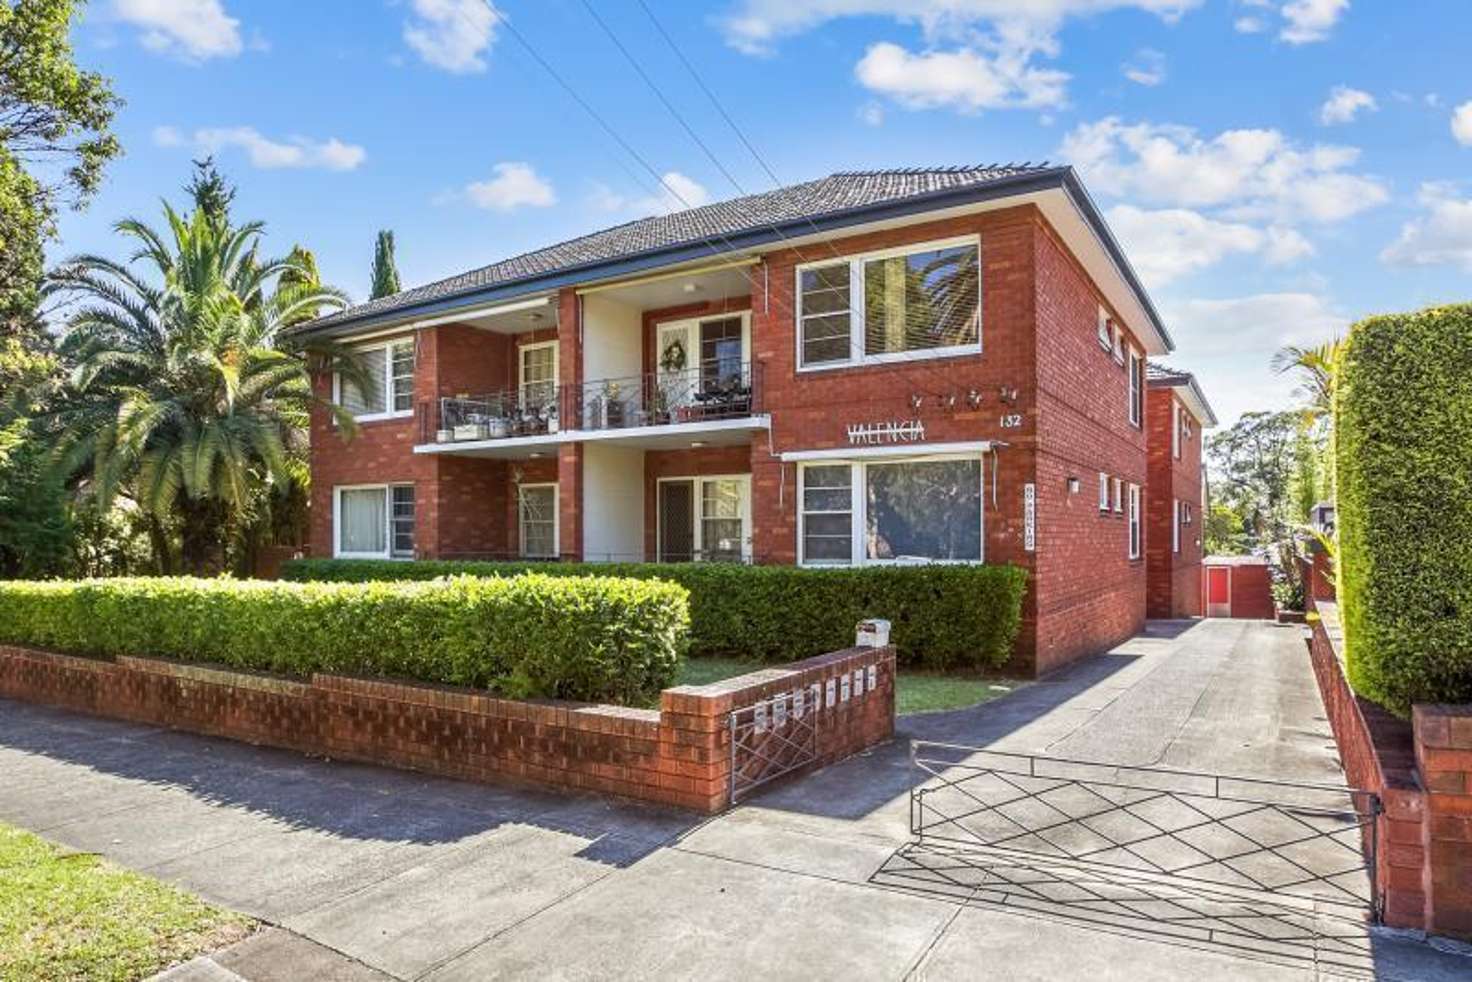 Main view of Homely apartment listing, 5/132 Victoria Street, Ashfield NSW 2131